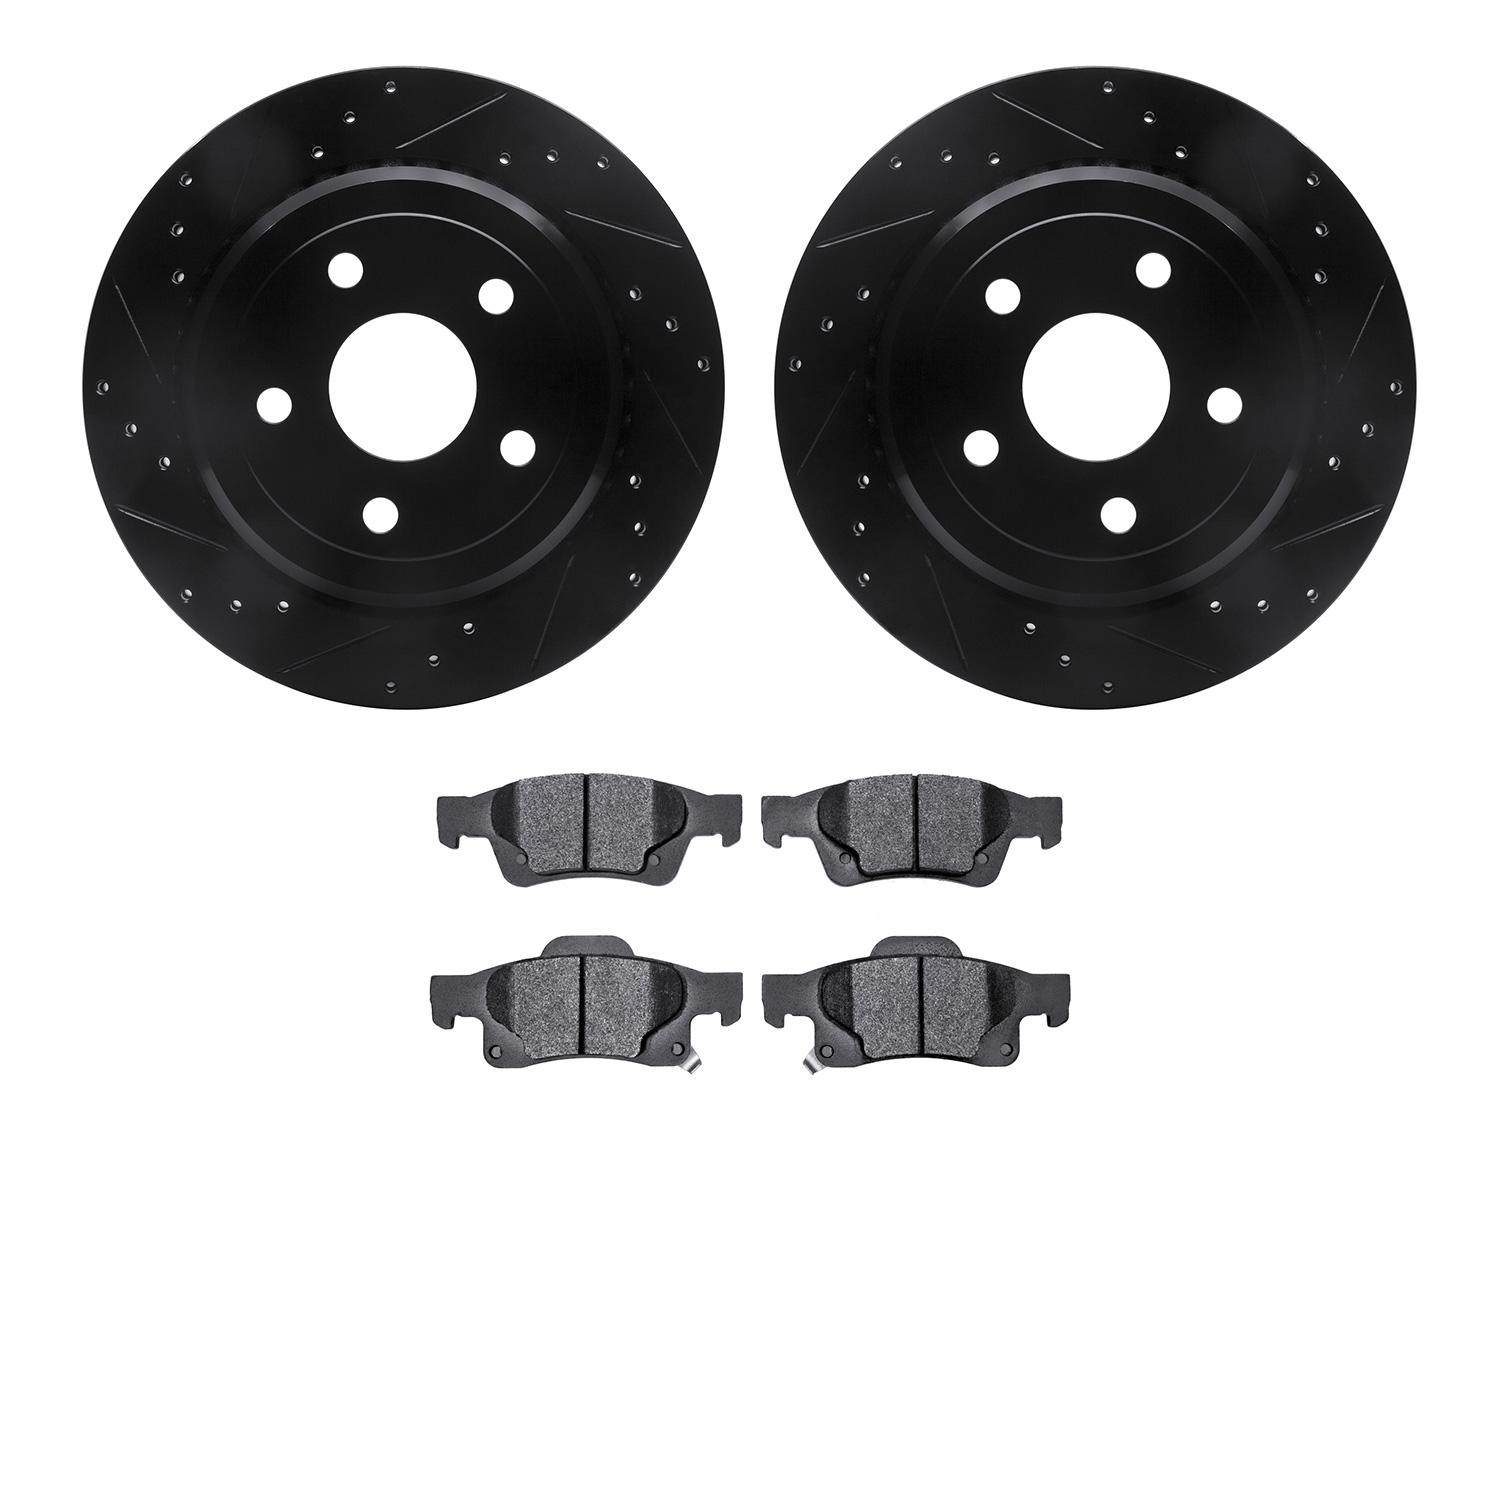 8402-42007 Drilled/Slotted Brake Rotors with Ultimate-Duty Brake Pads Kit [Black], Fits Select Mopar, Position: Rear